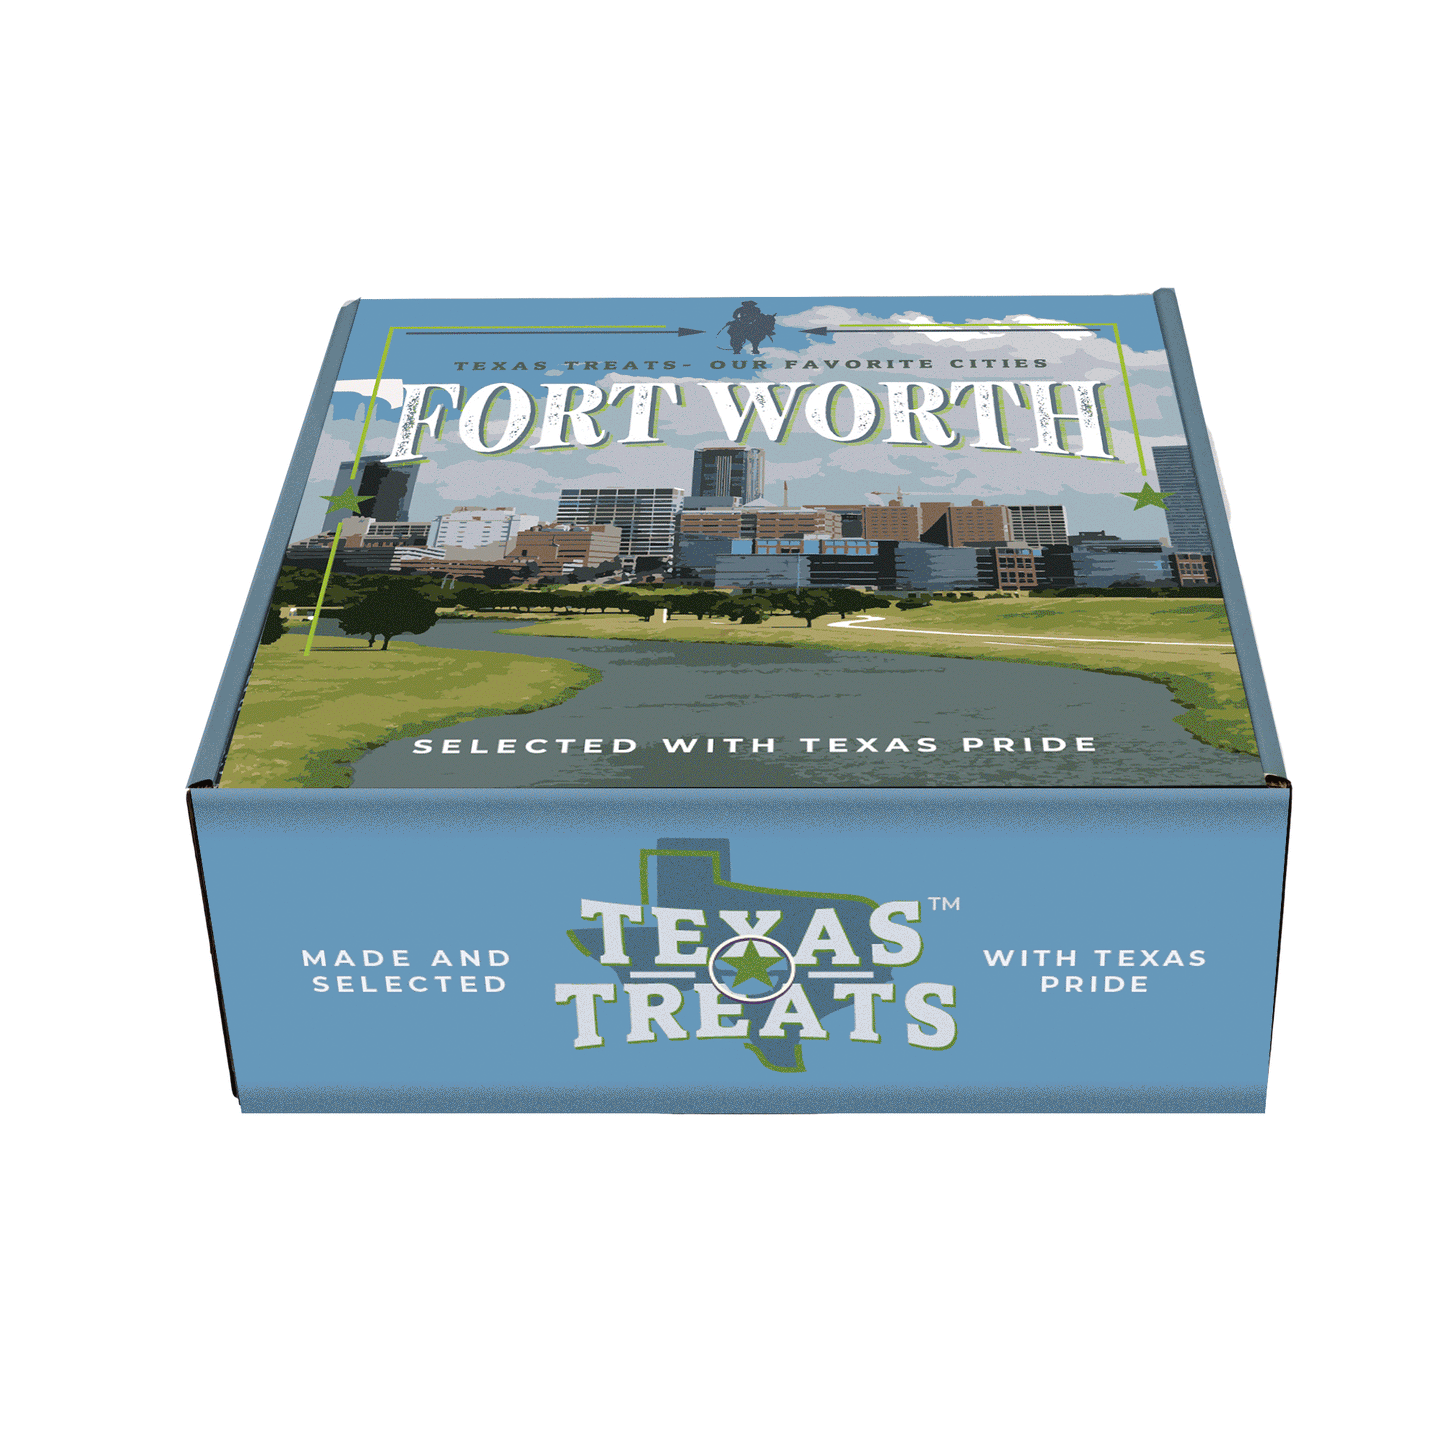 Rotating gif of the Fort Worth gift box, available for personal or corporate gifting.